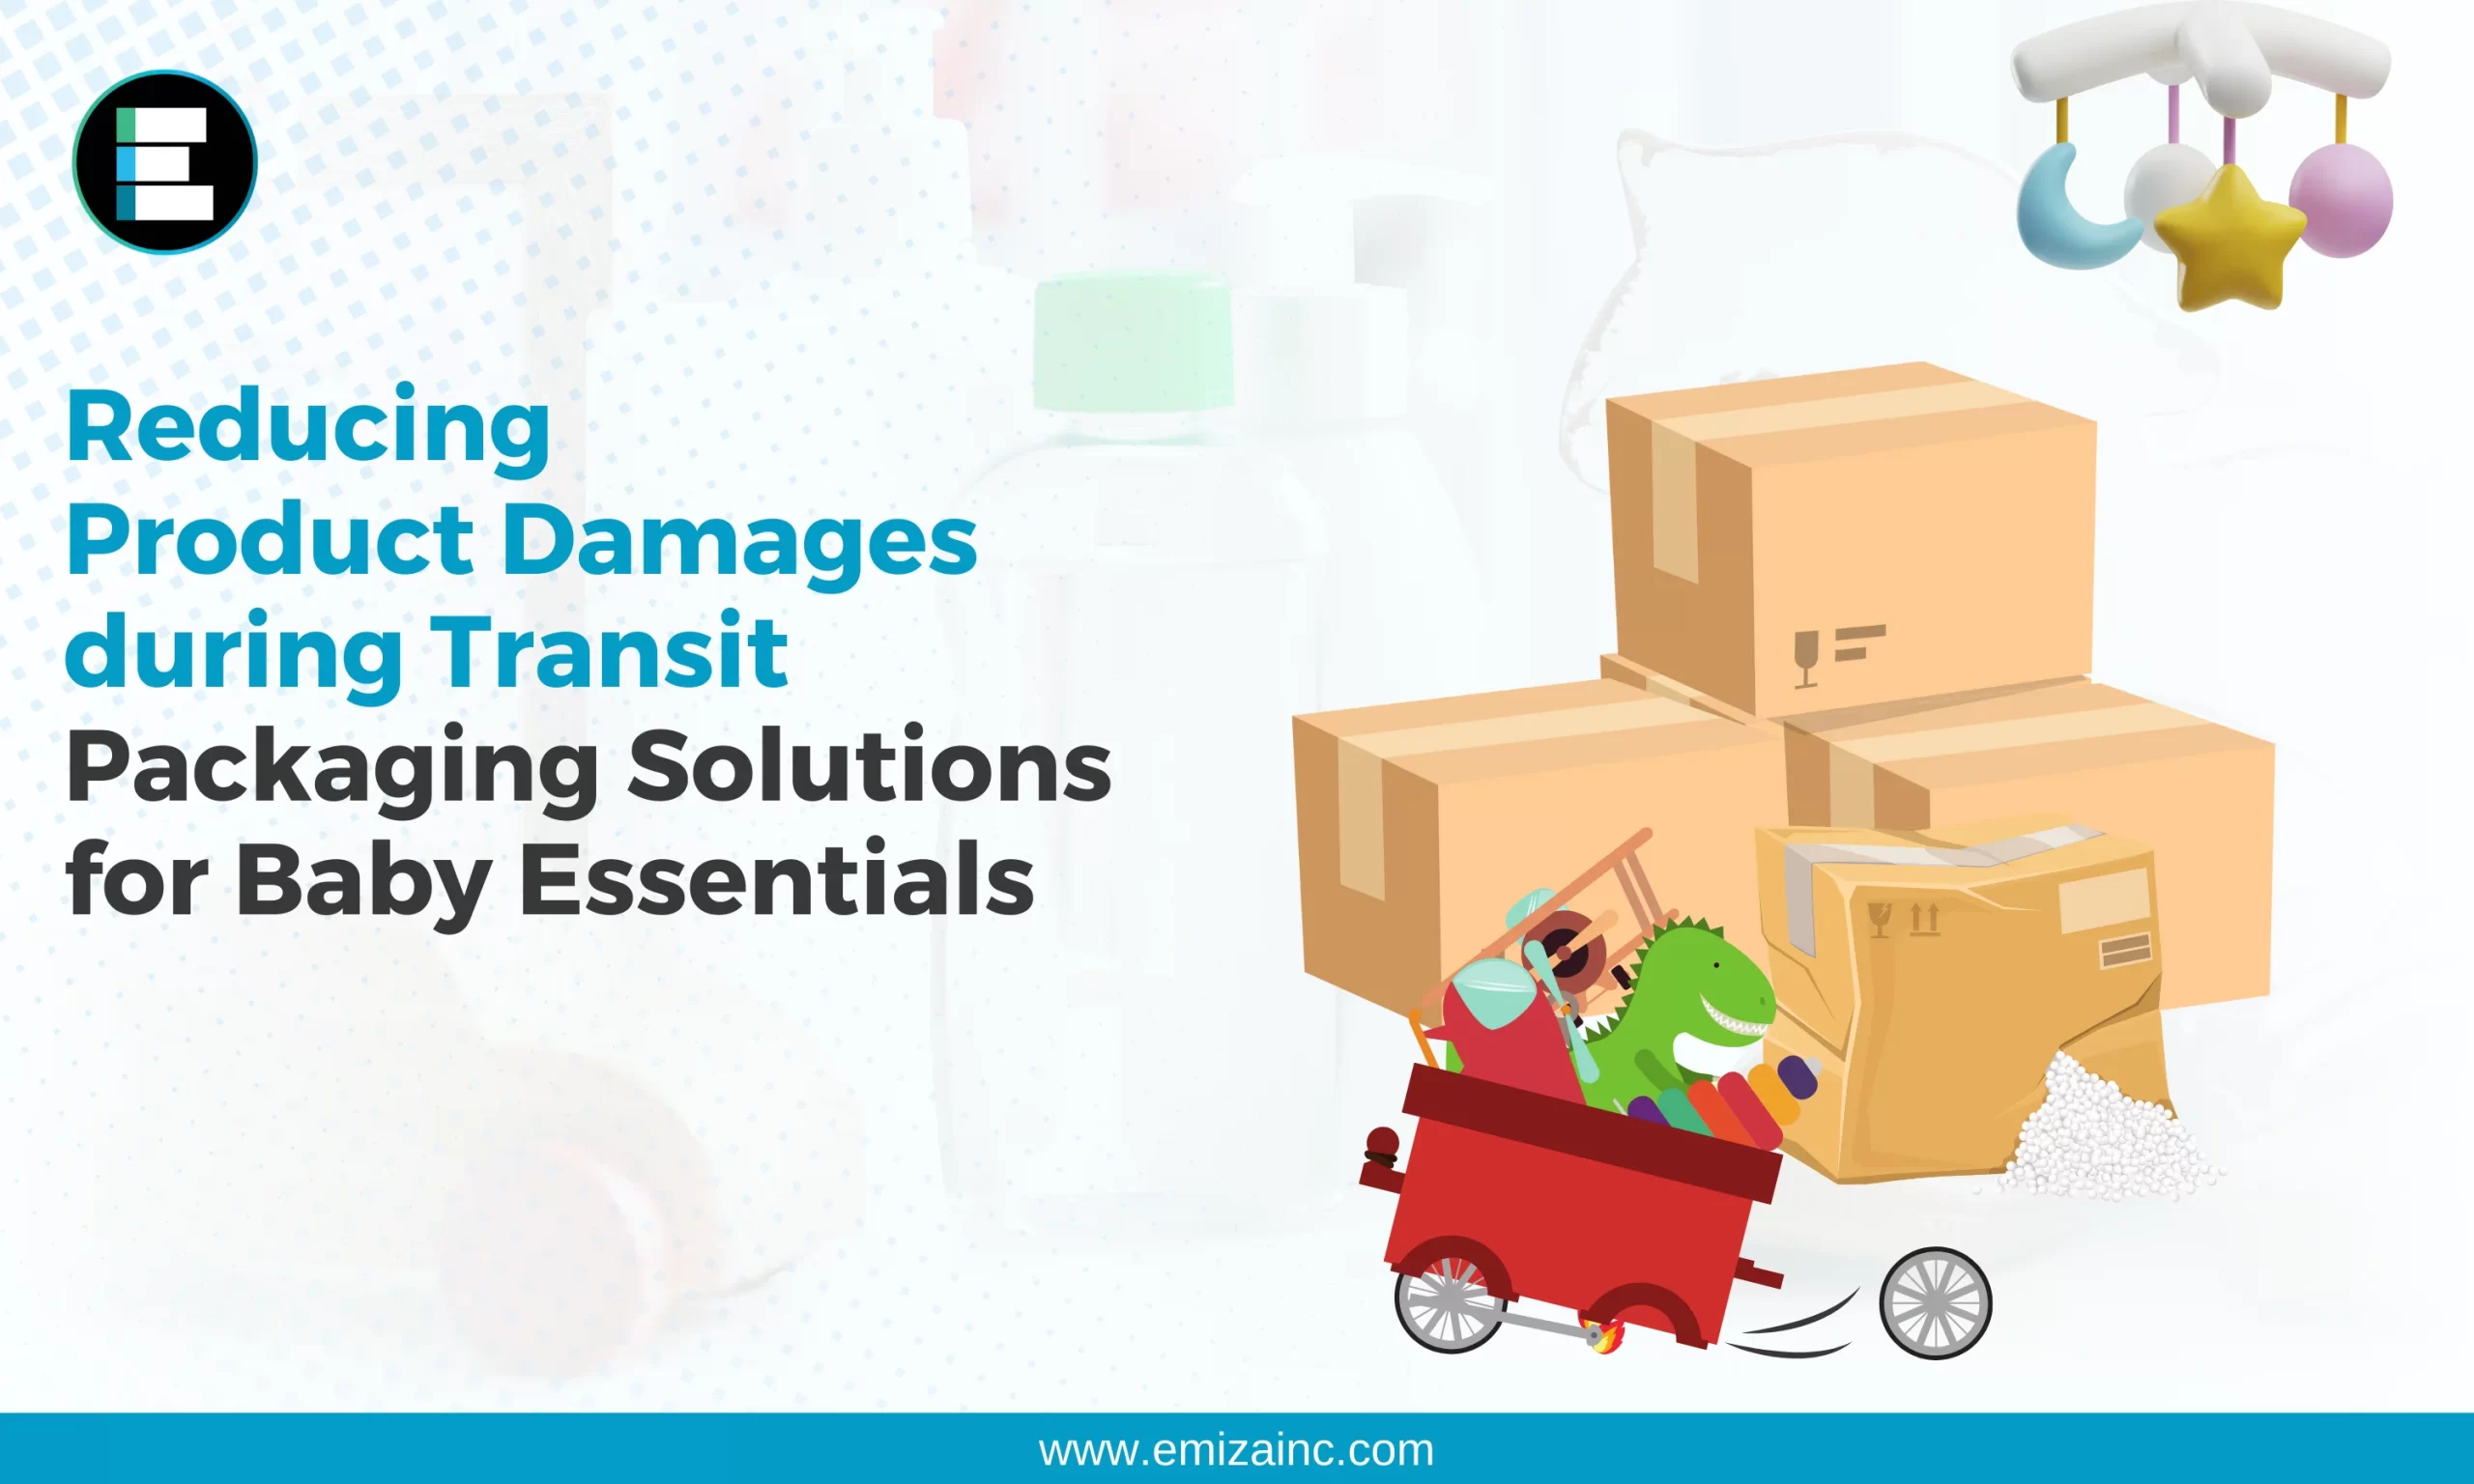 Reducing Product Damages during Transit Packaging Solutions for Baby Essentials